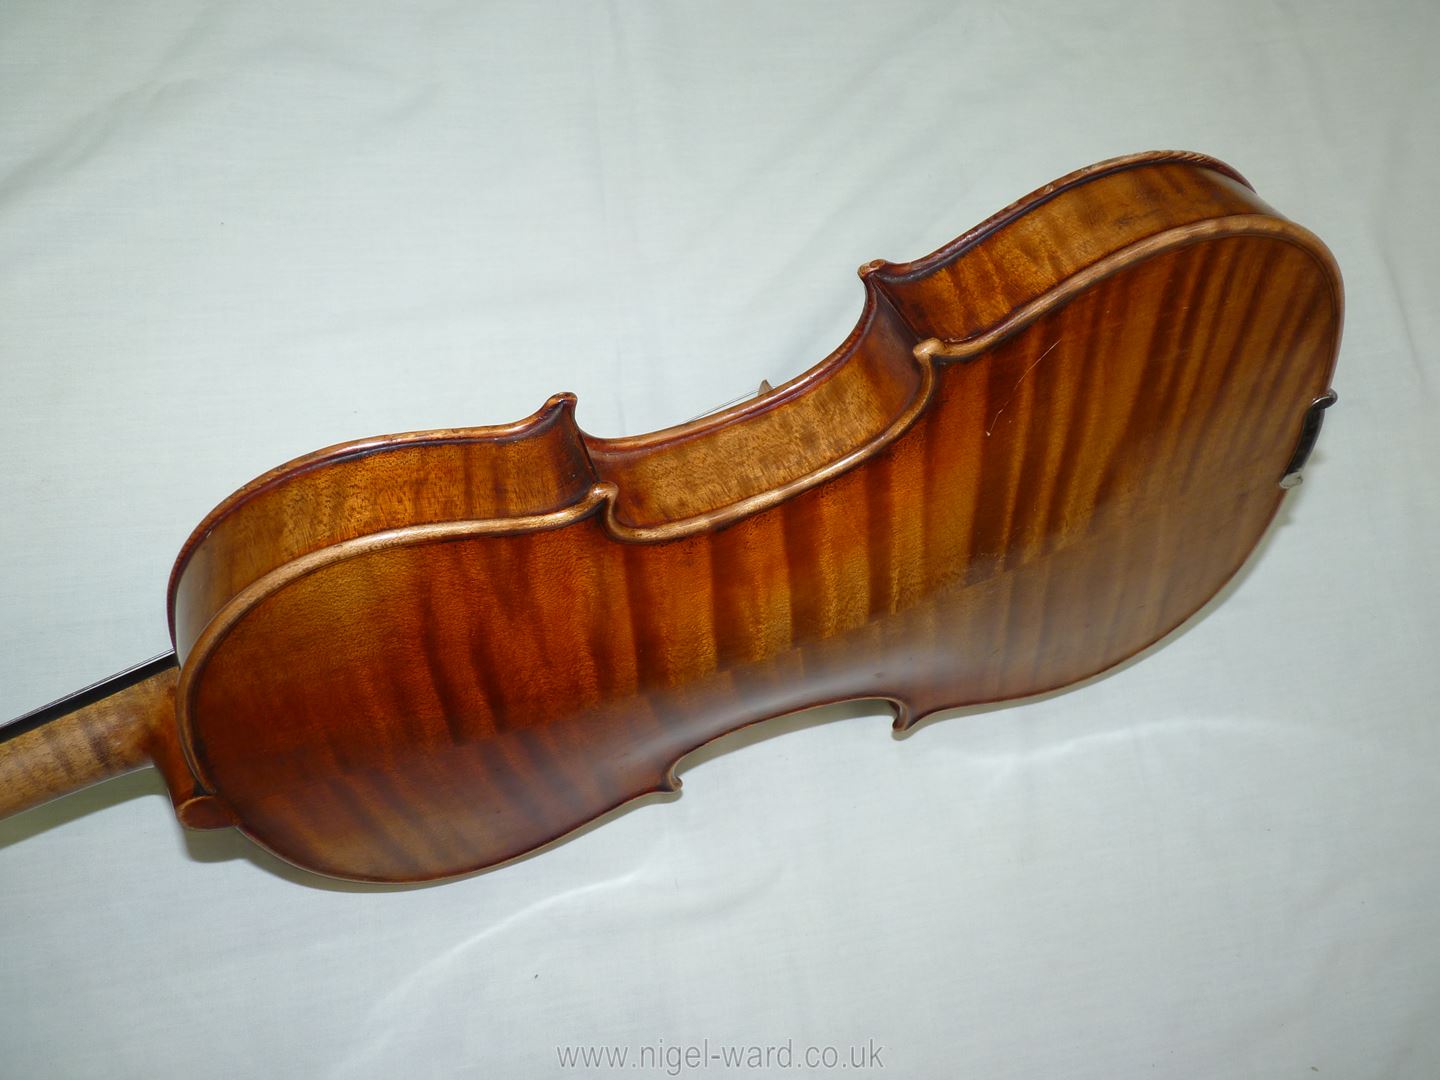 An antique violin having a well-carved scroll and nicely figured body including the back, - Image 13 of 49